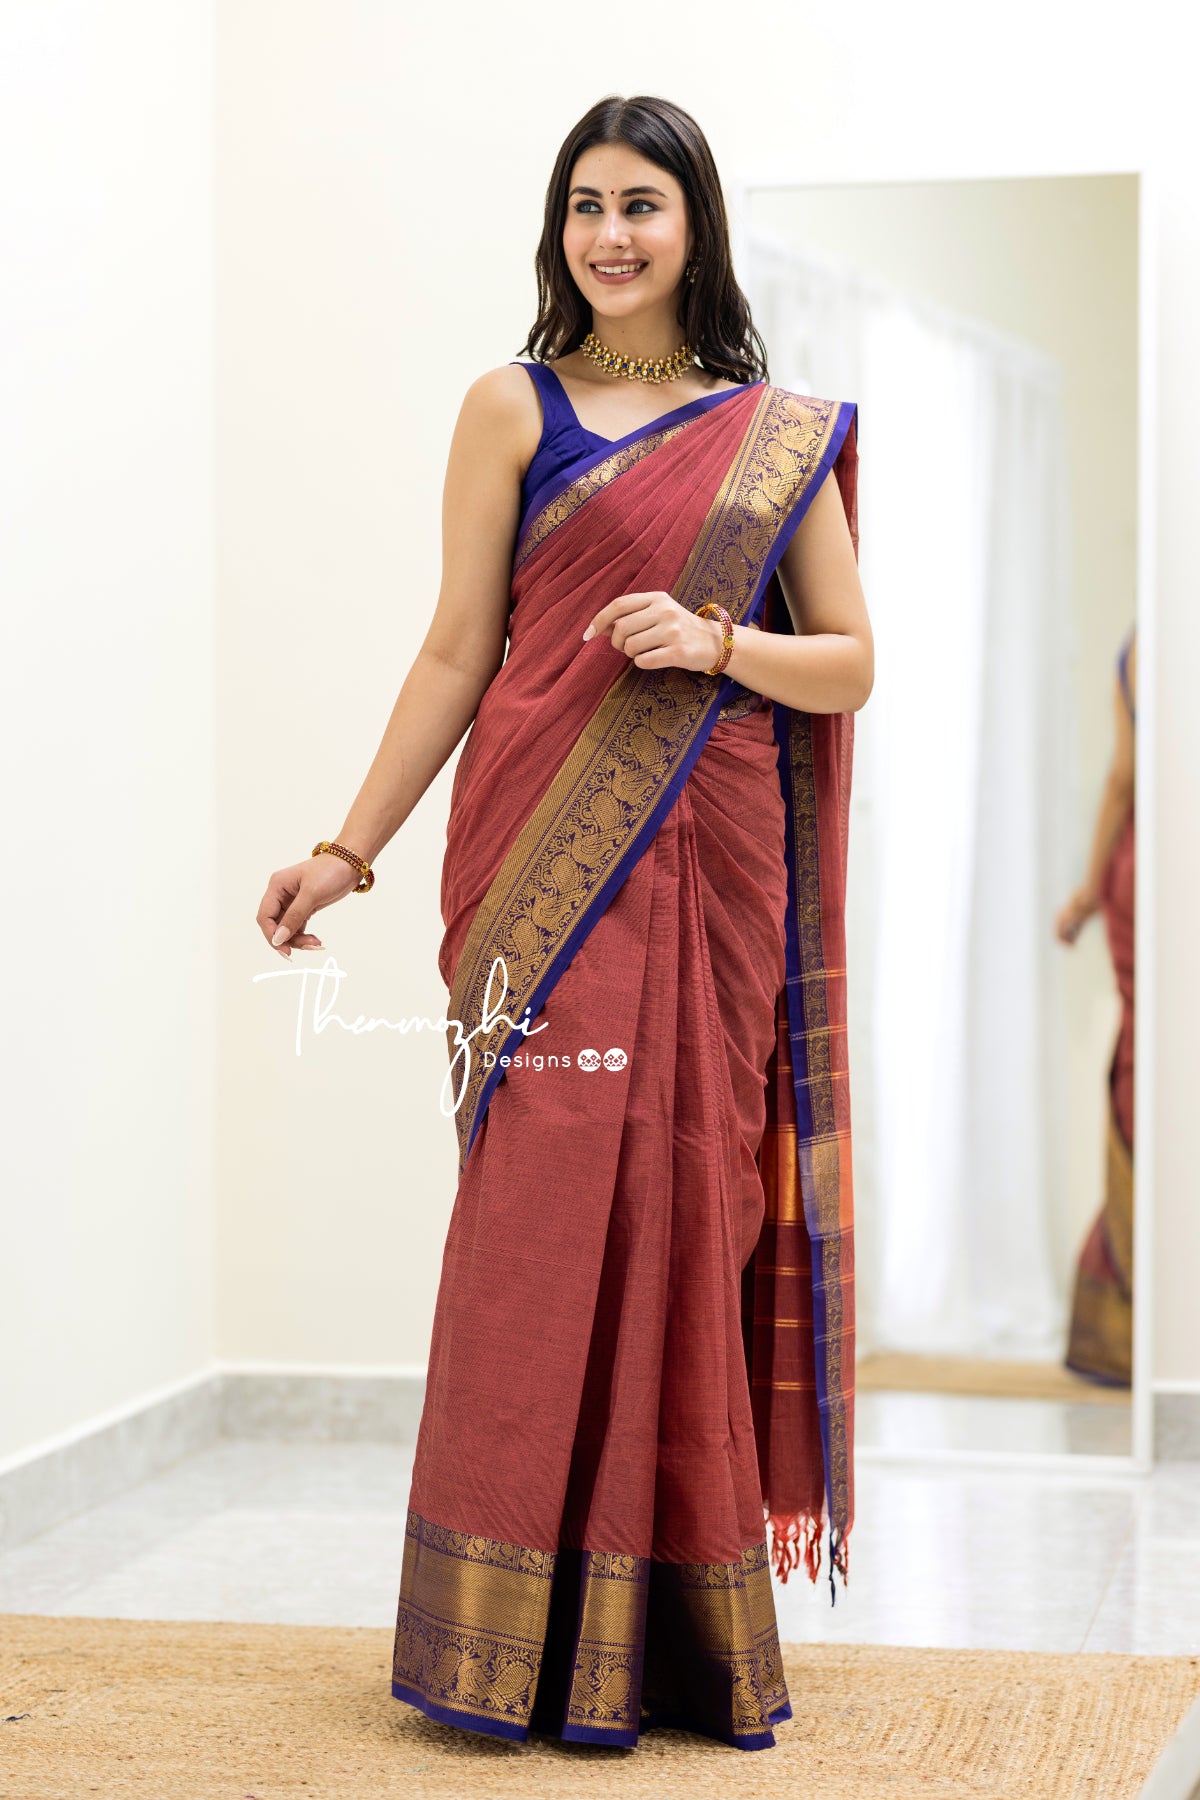 Buy Wine Color Saree Online At Great Prices – Koskii